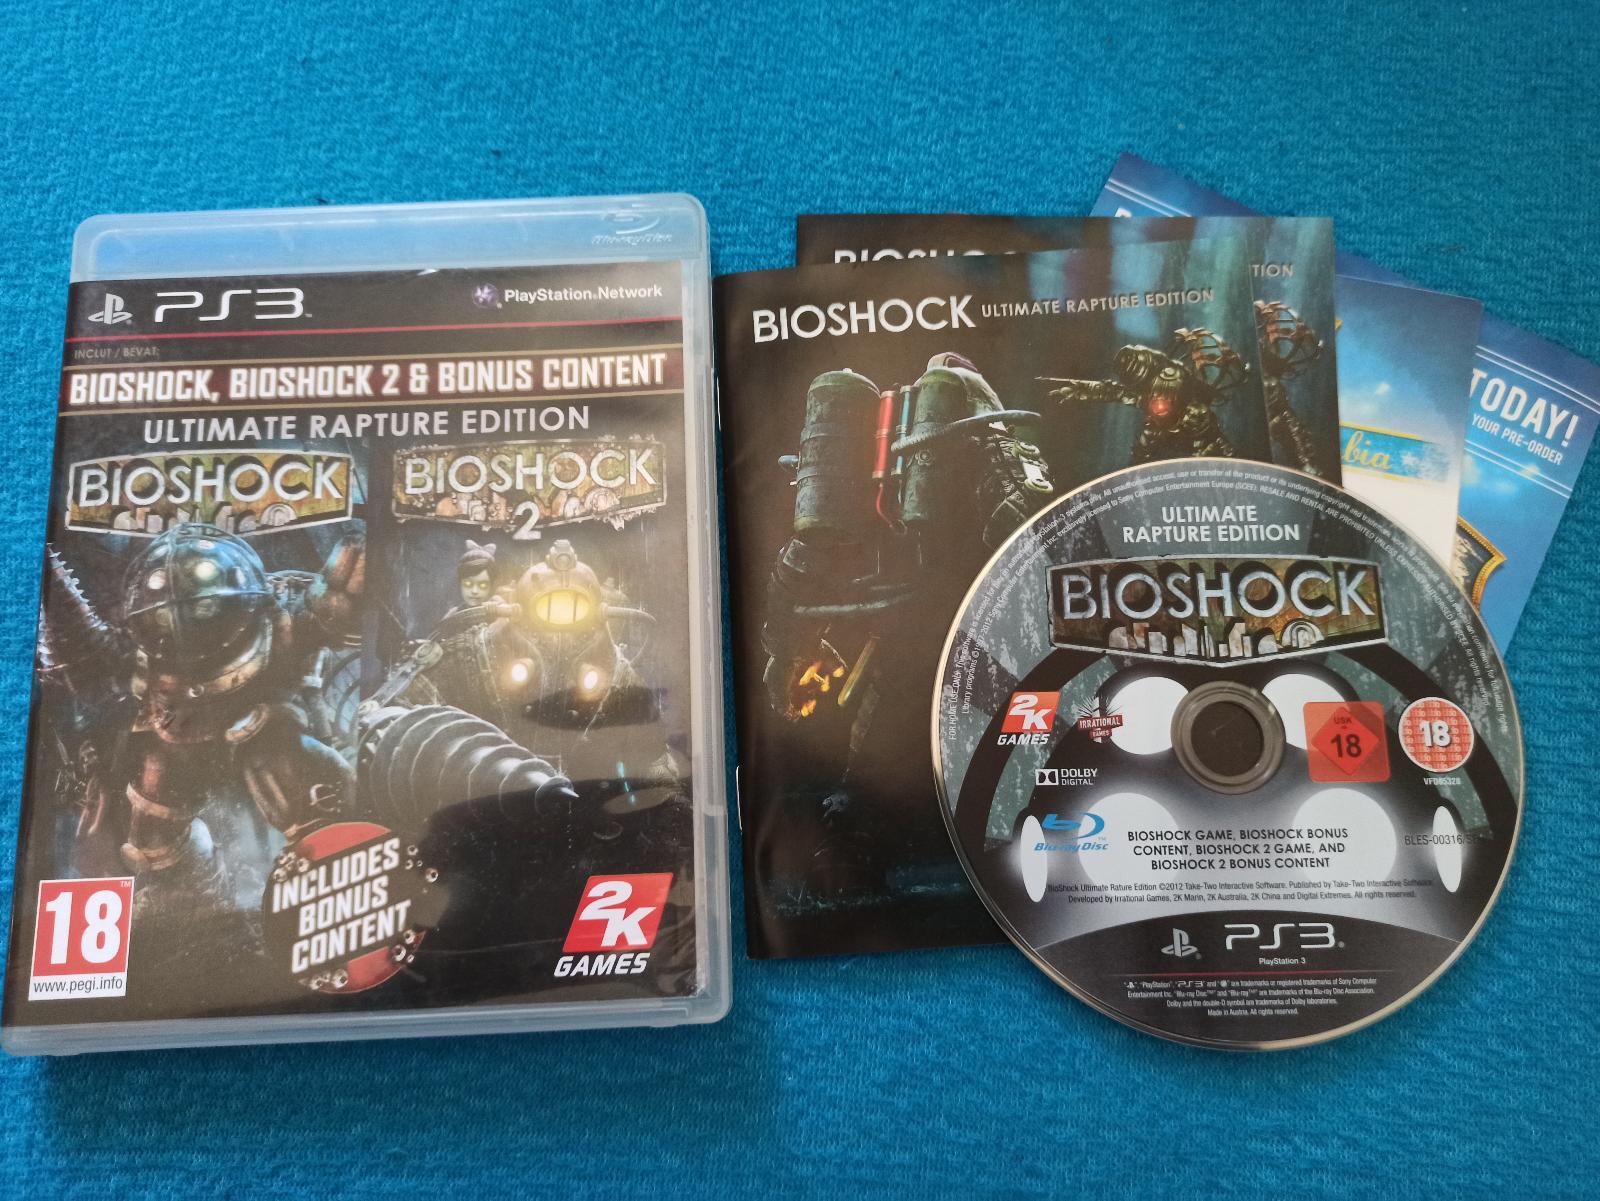 PS3 Bioshock Ultimate Rapture Edition - Hry